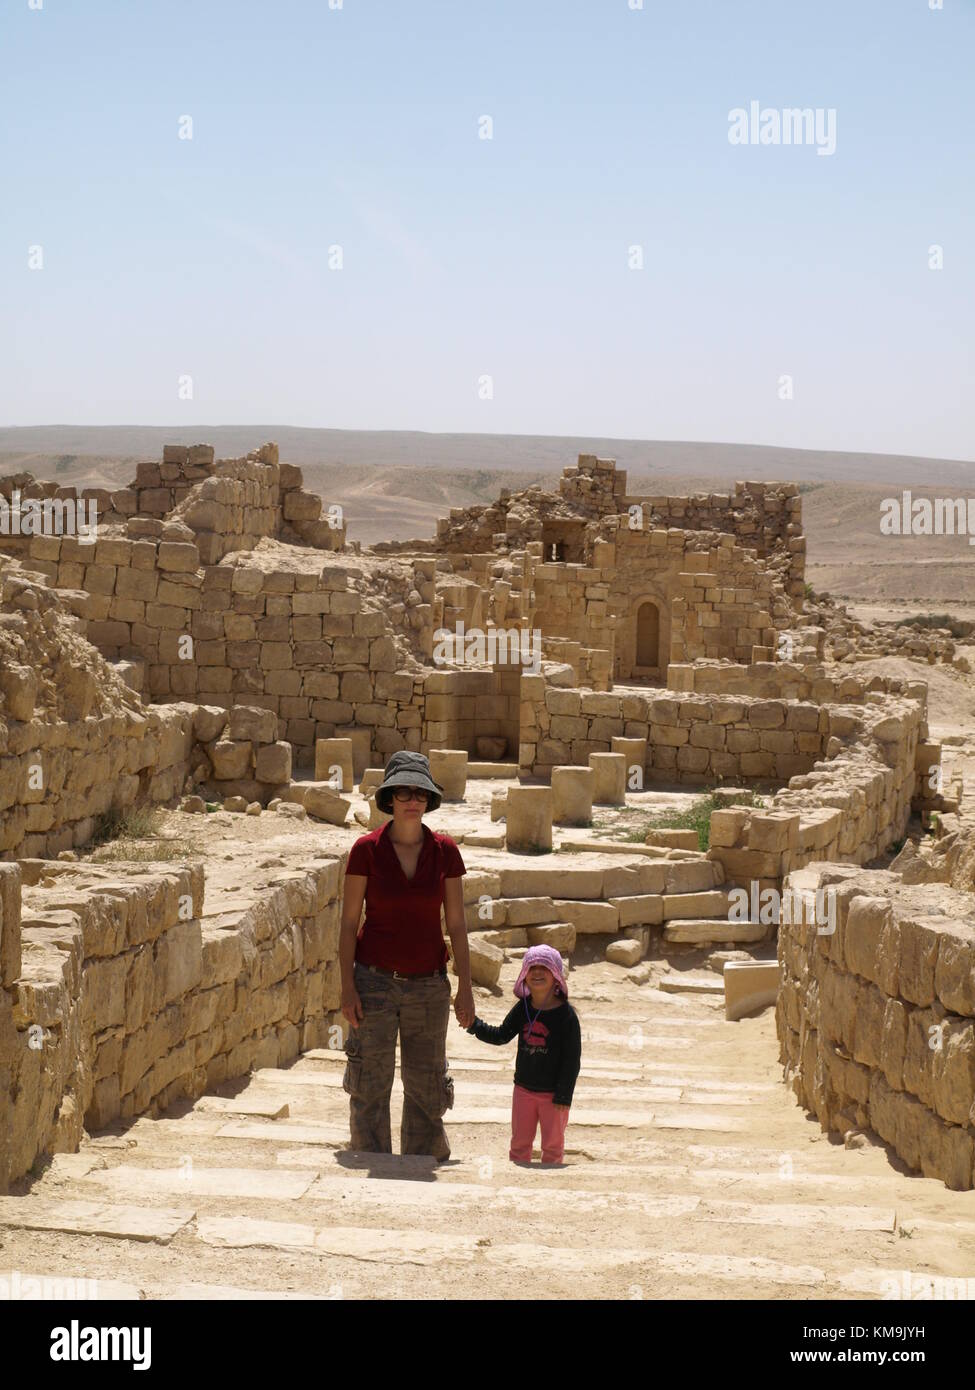 mother and daughter visiting Ancient city remains and walking on an old road or stairway Stock Photo